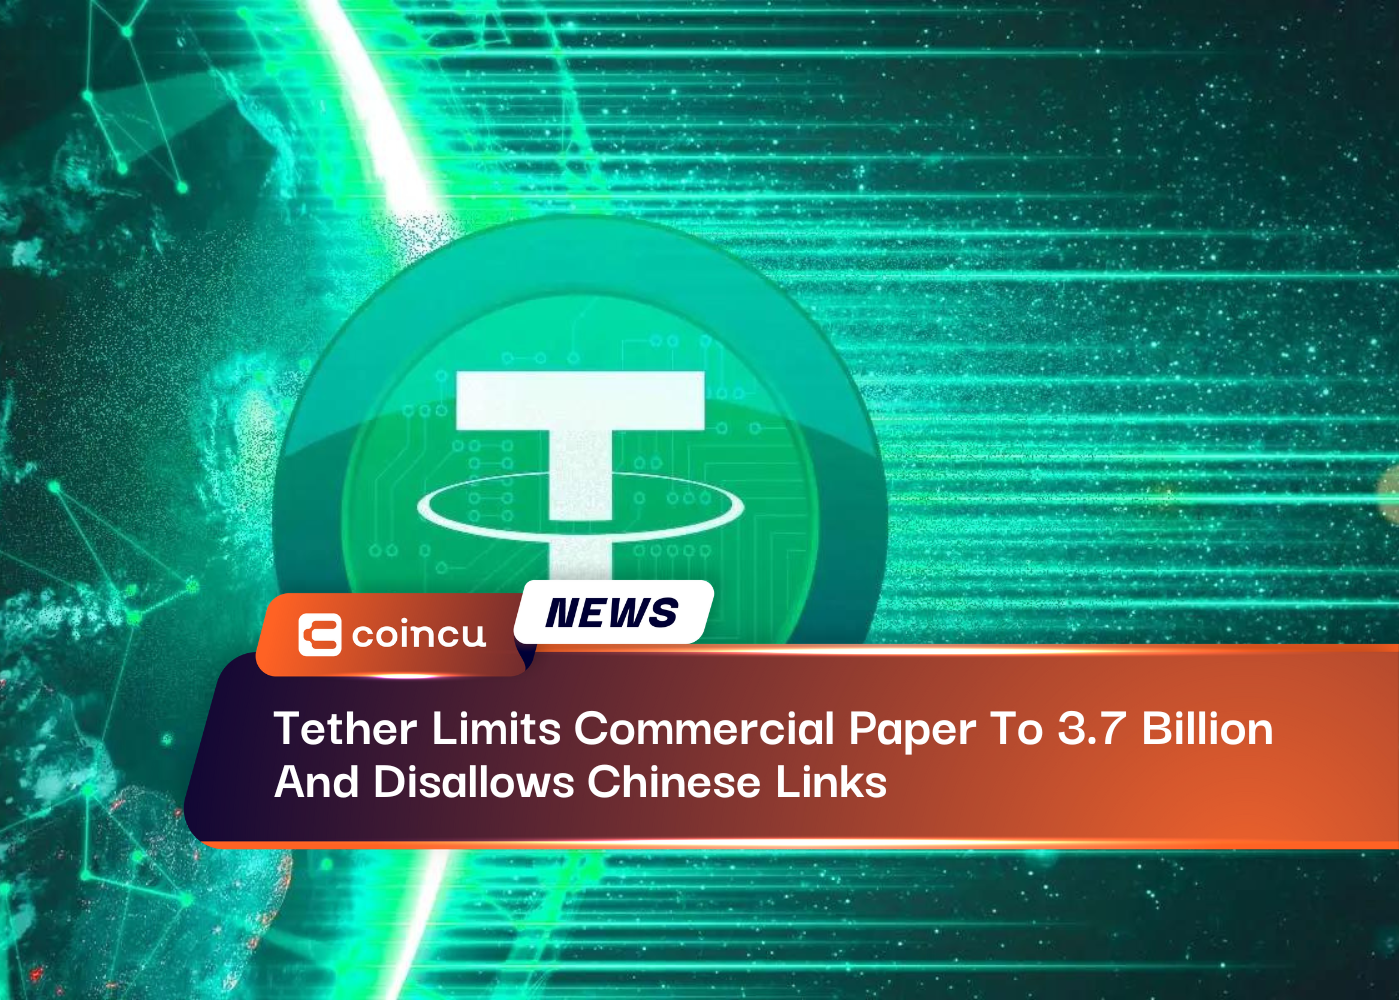 Tether Limits Commercial Paper To 3.7 Billion